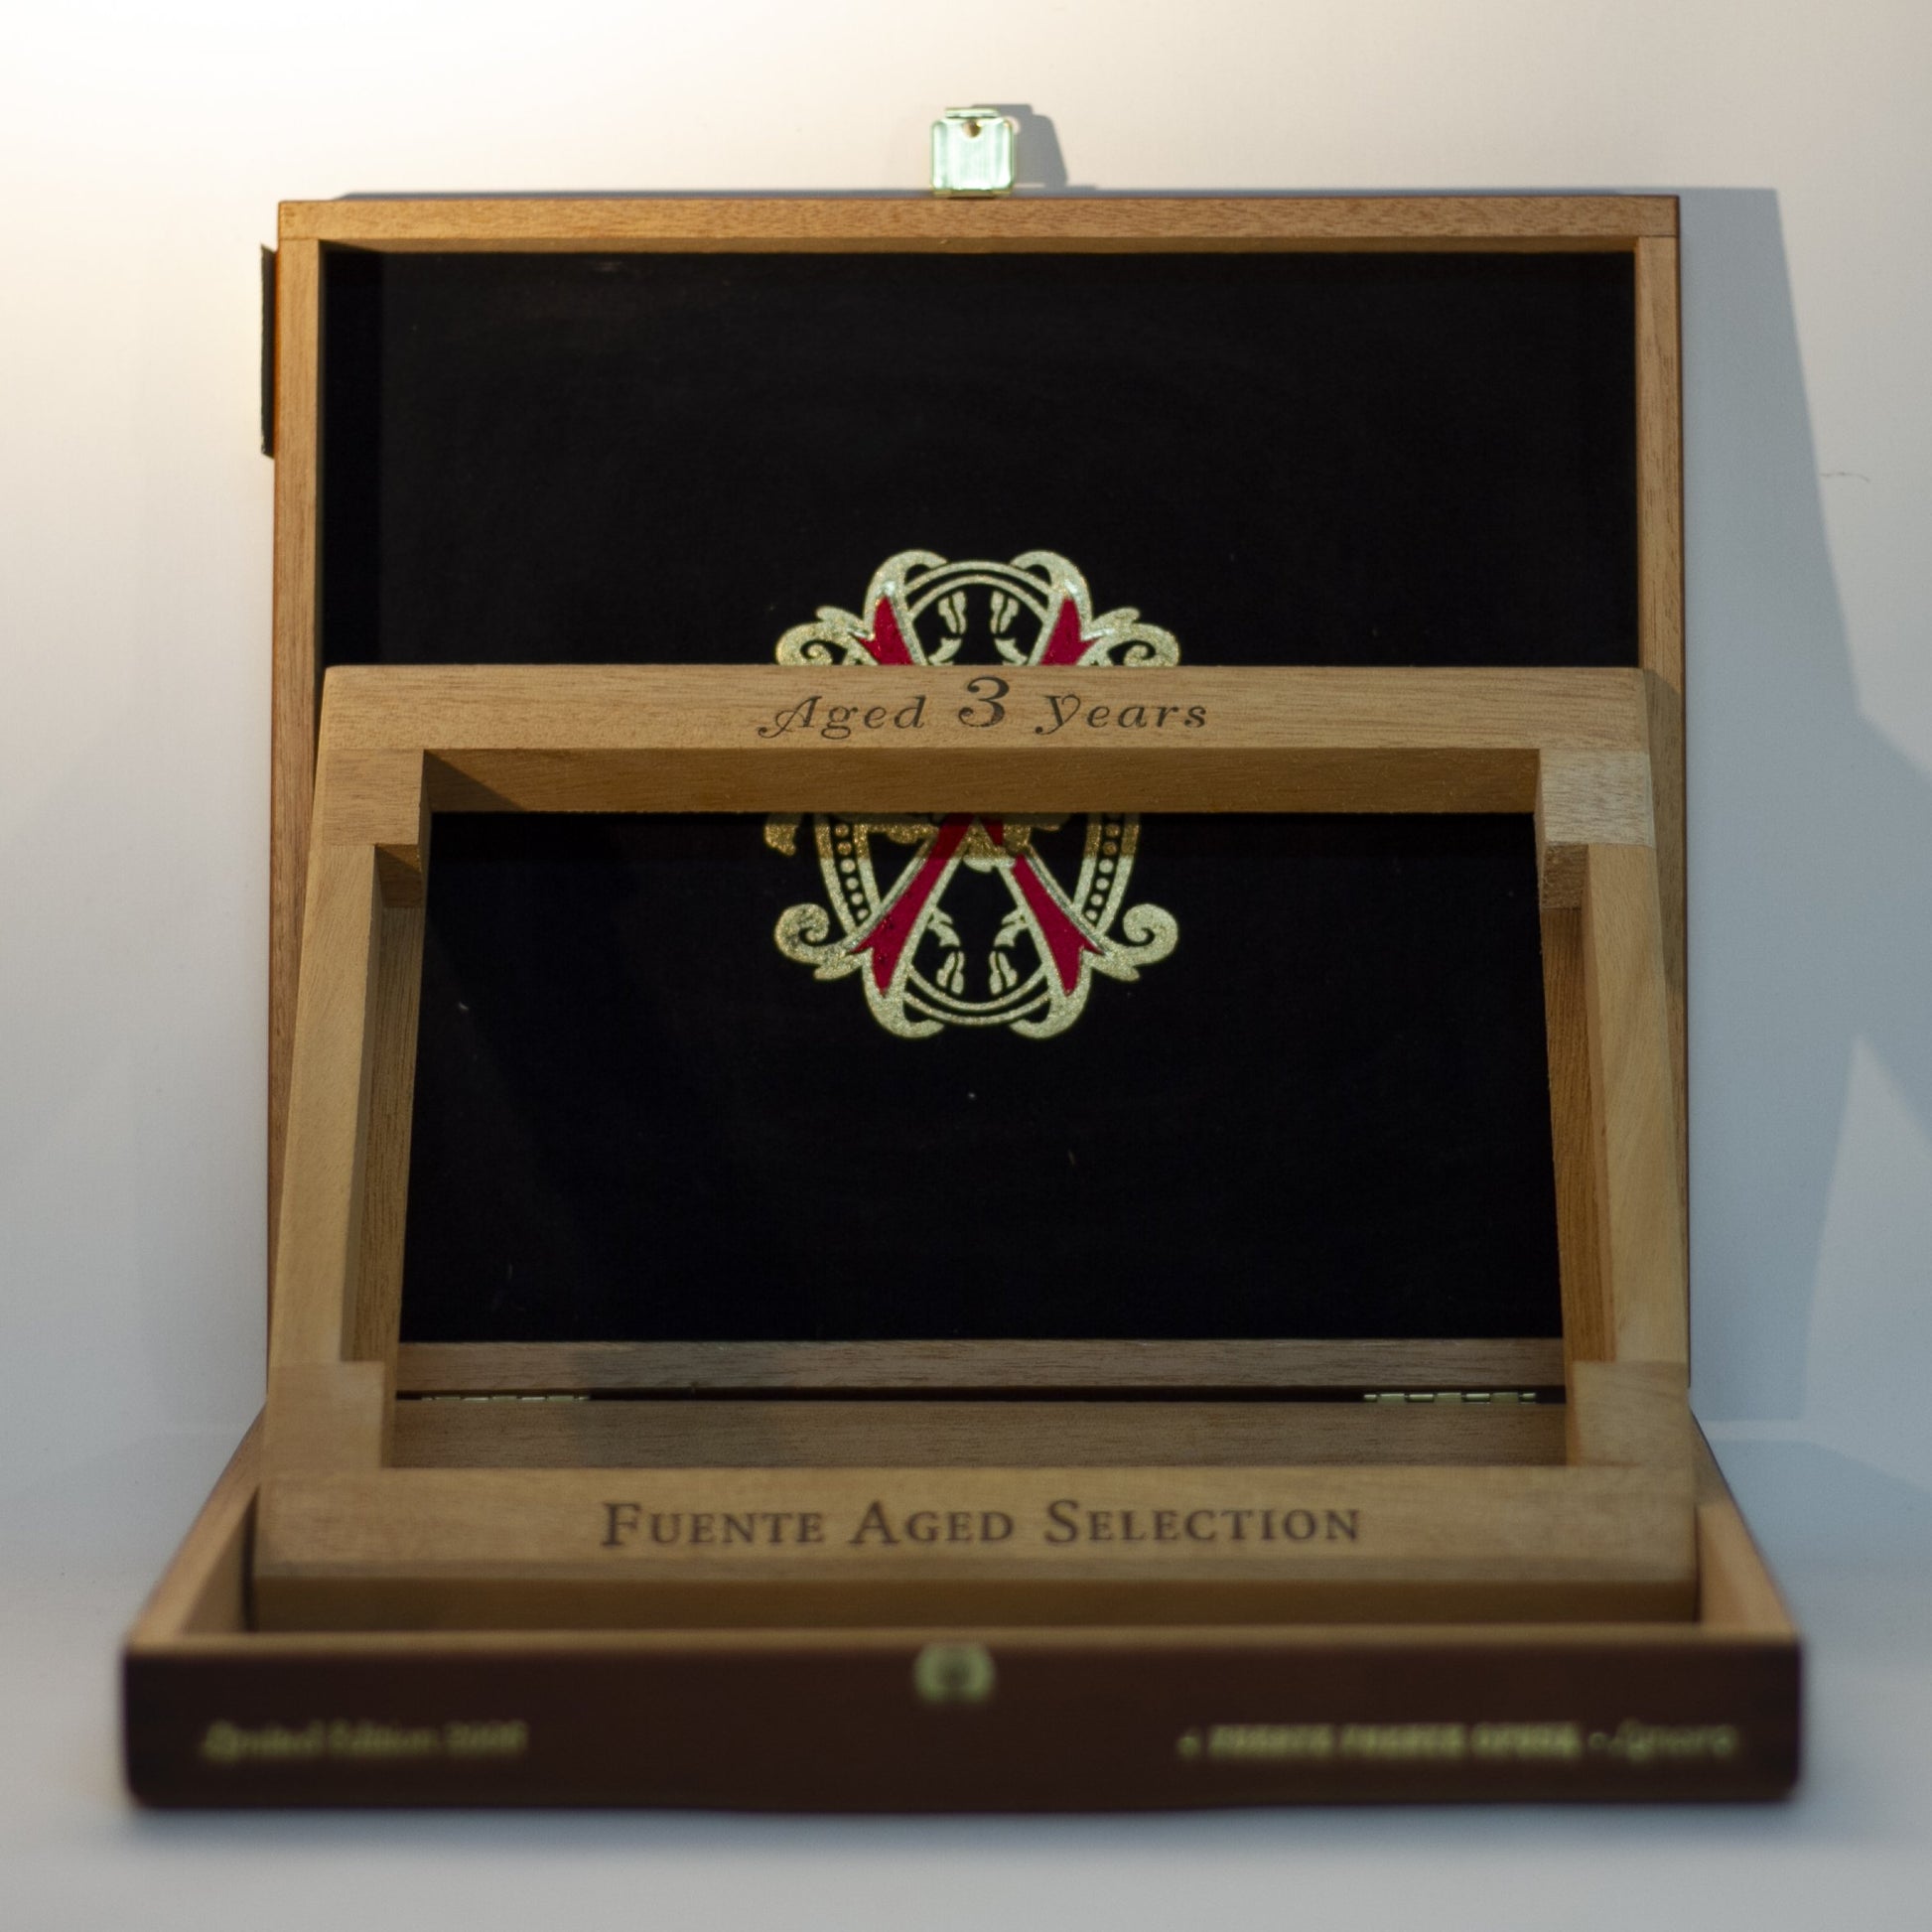 Gift for cigar connoisseur! CHATEAU de la FUENTE WOOD CIGAR BOX for FUENTE FUENTE OPUSX LANCERO cigars. Held 2006 limited-edition set containing 4 rare Fuente Fuente OpusX cigars, photo essay book, Journey to Chateau de la Fuente, and travel size Humidipak. Only 2,500 made and sold; box stamped 803 out of the 2500. 